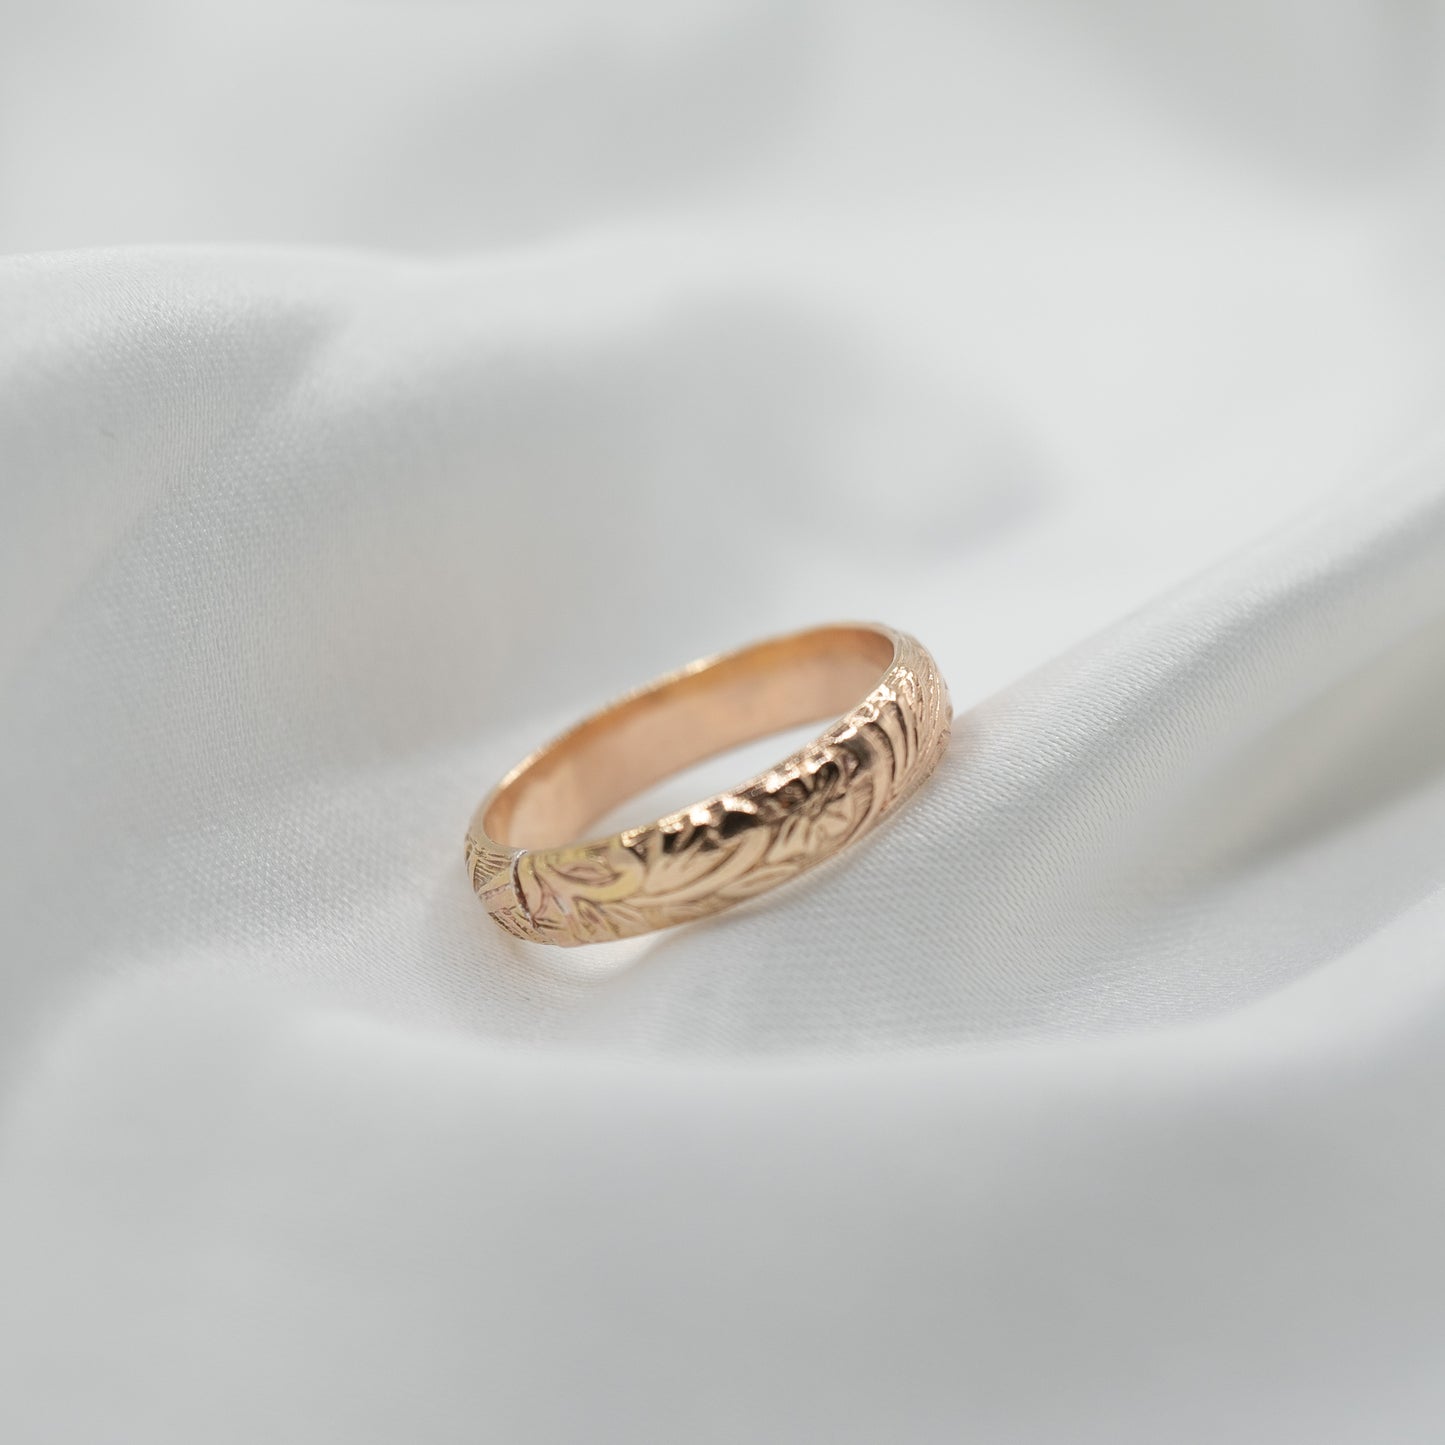 Gold Filled Vintage Pattern Ring - shot on white - front view side